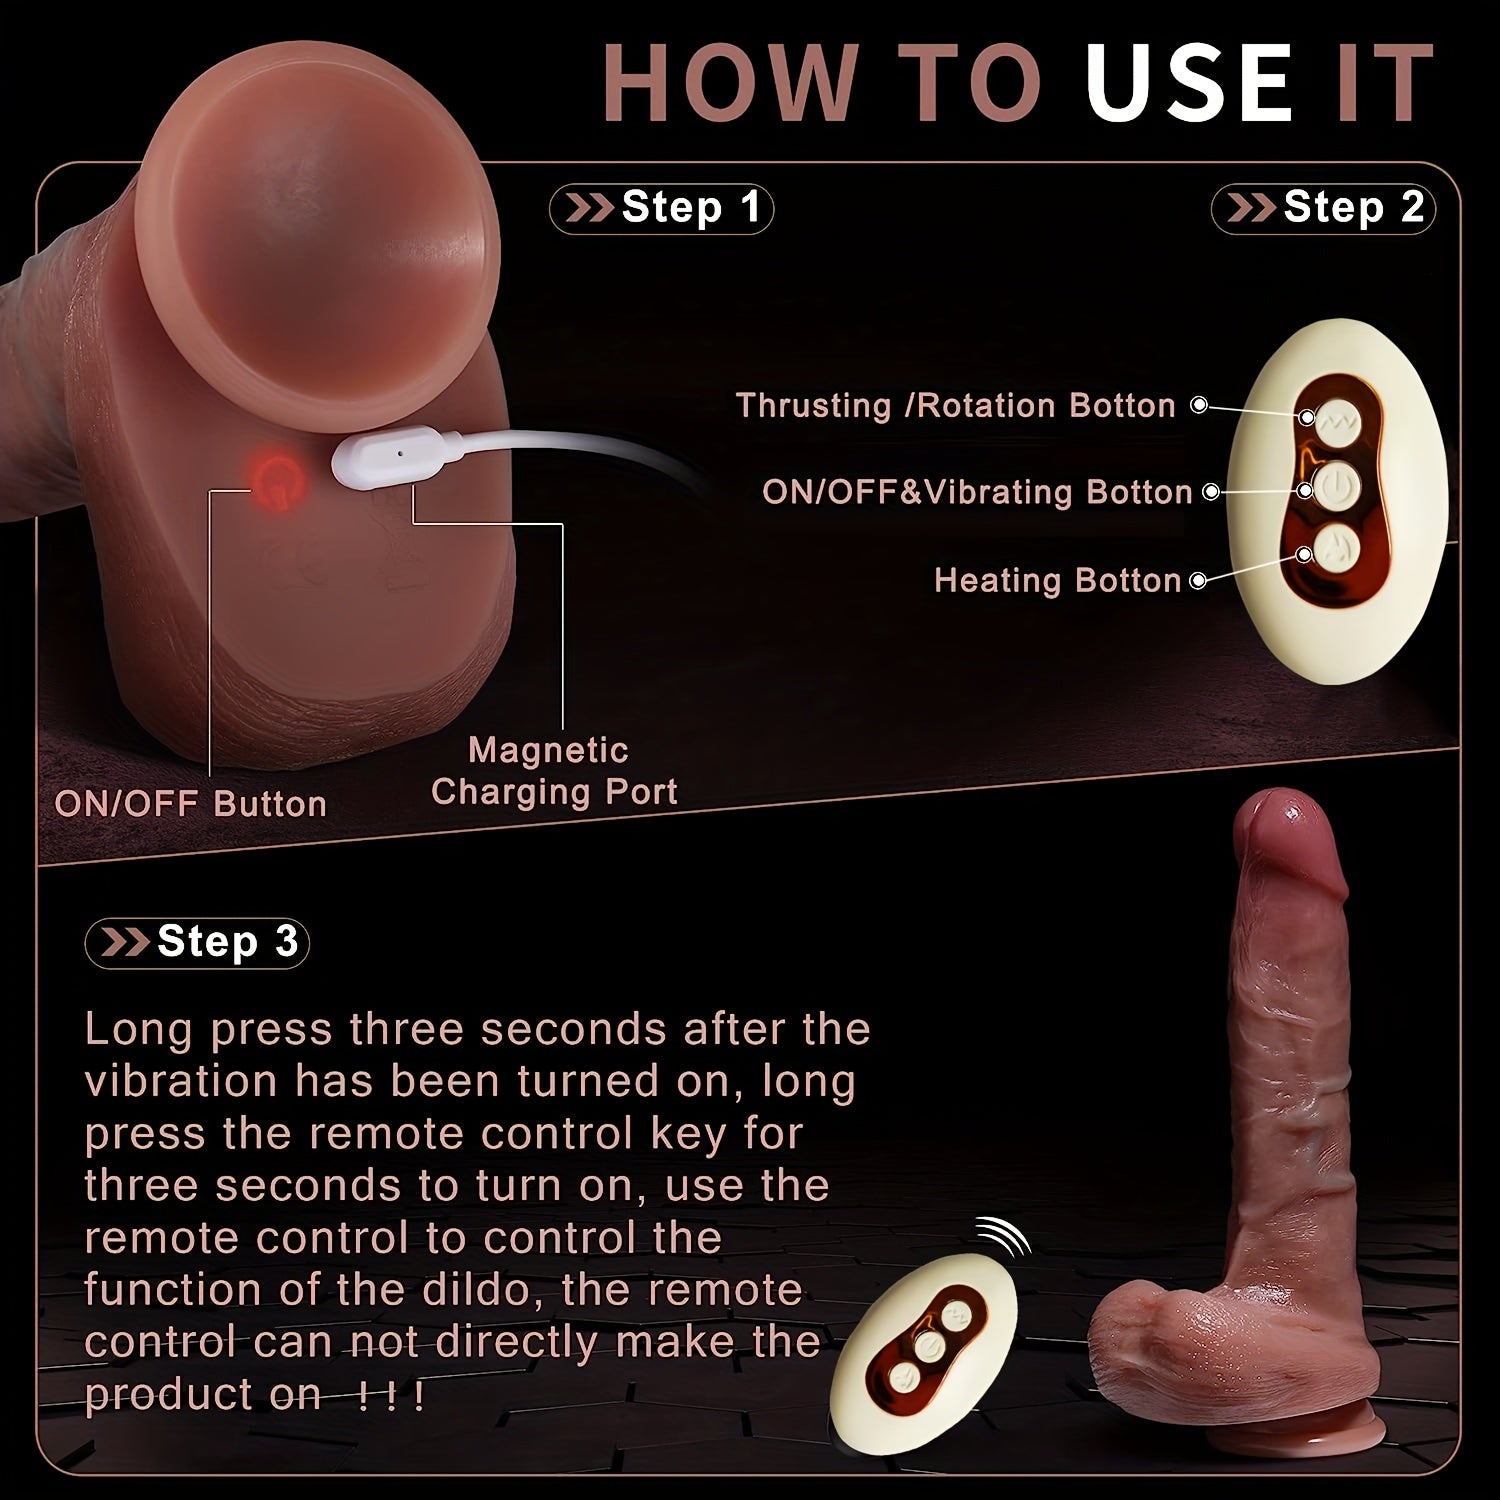 9.1 Inch Realistic Dildo 5 Thrusting & 10 Vibrating Modes & Heating Function G-spot Stimulation Suction Cup Remote Control